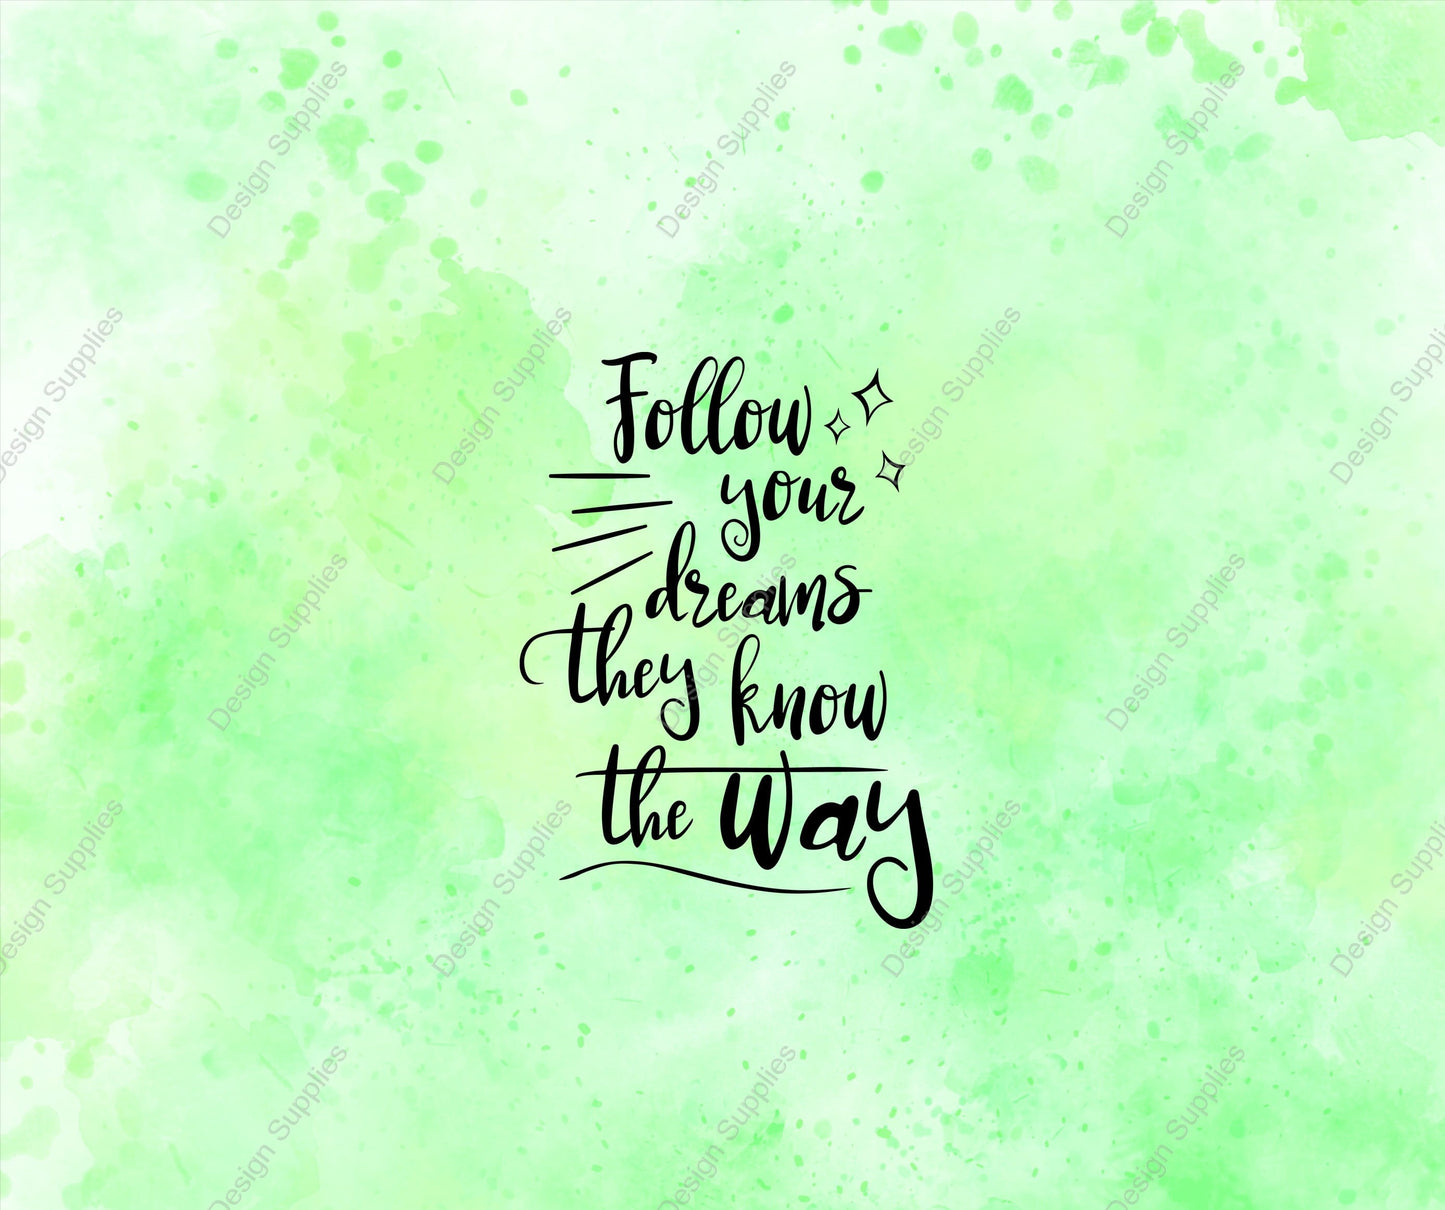 Follow Your Dreams, They Know The Way - Tumbler Wrap